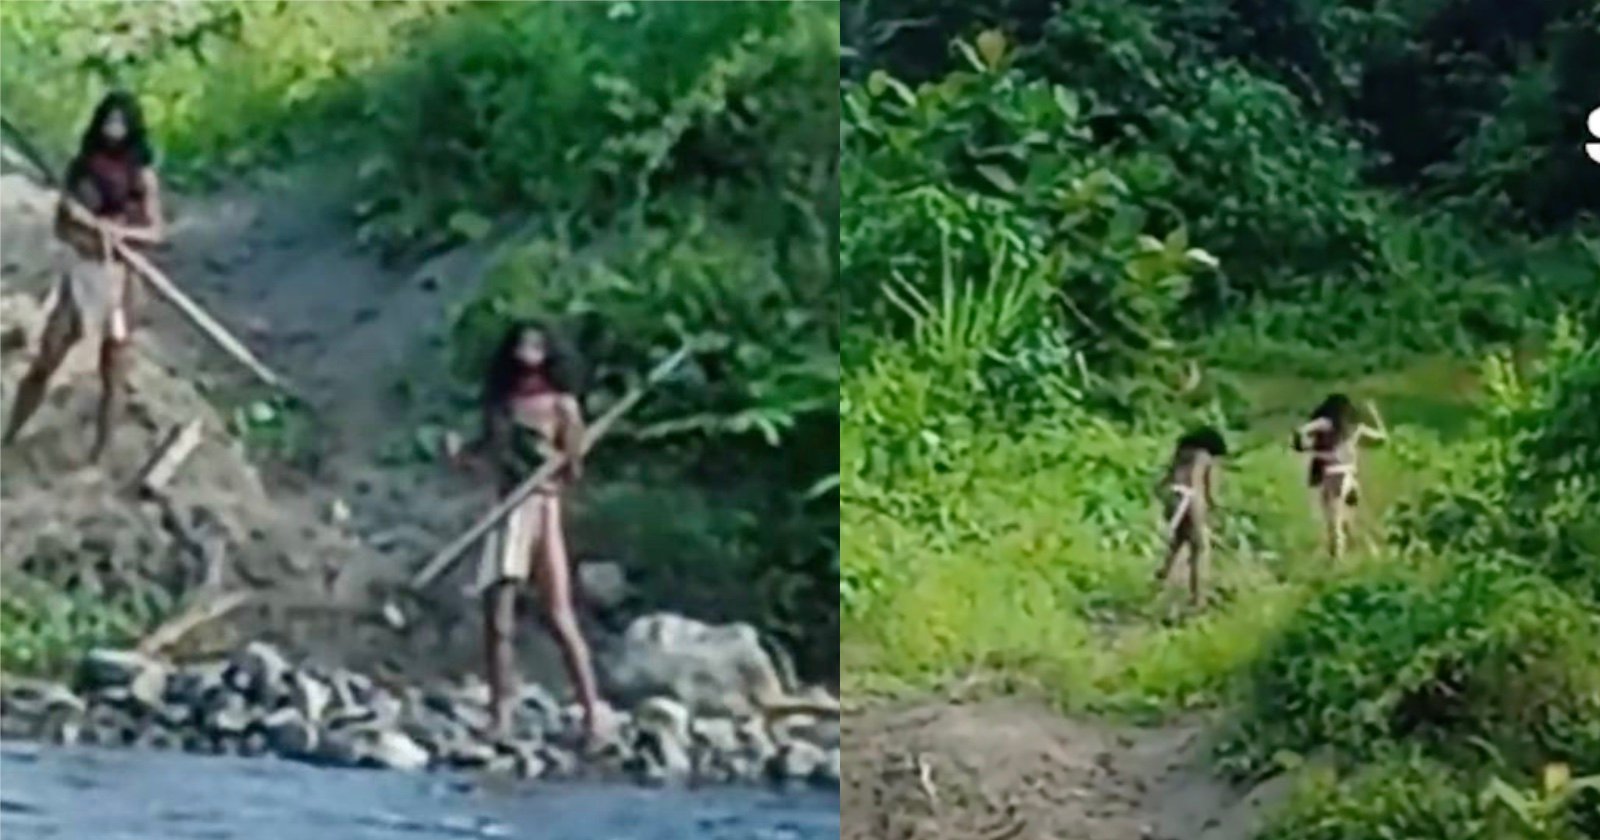  shocking footage shows uncontacted tribe being met 